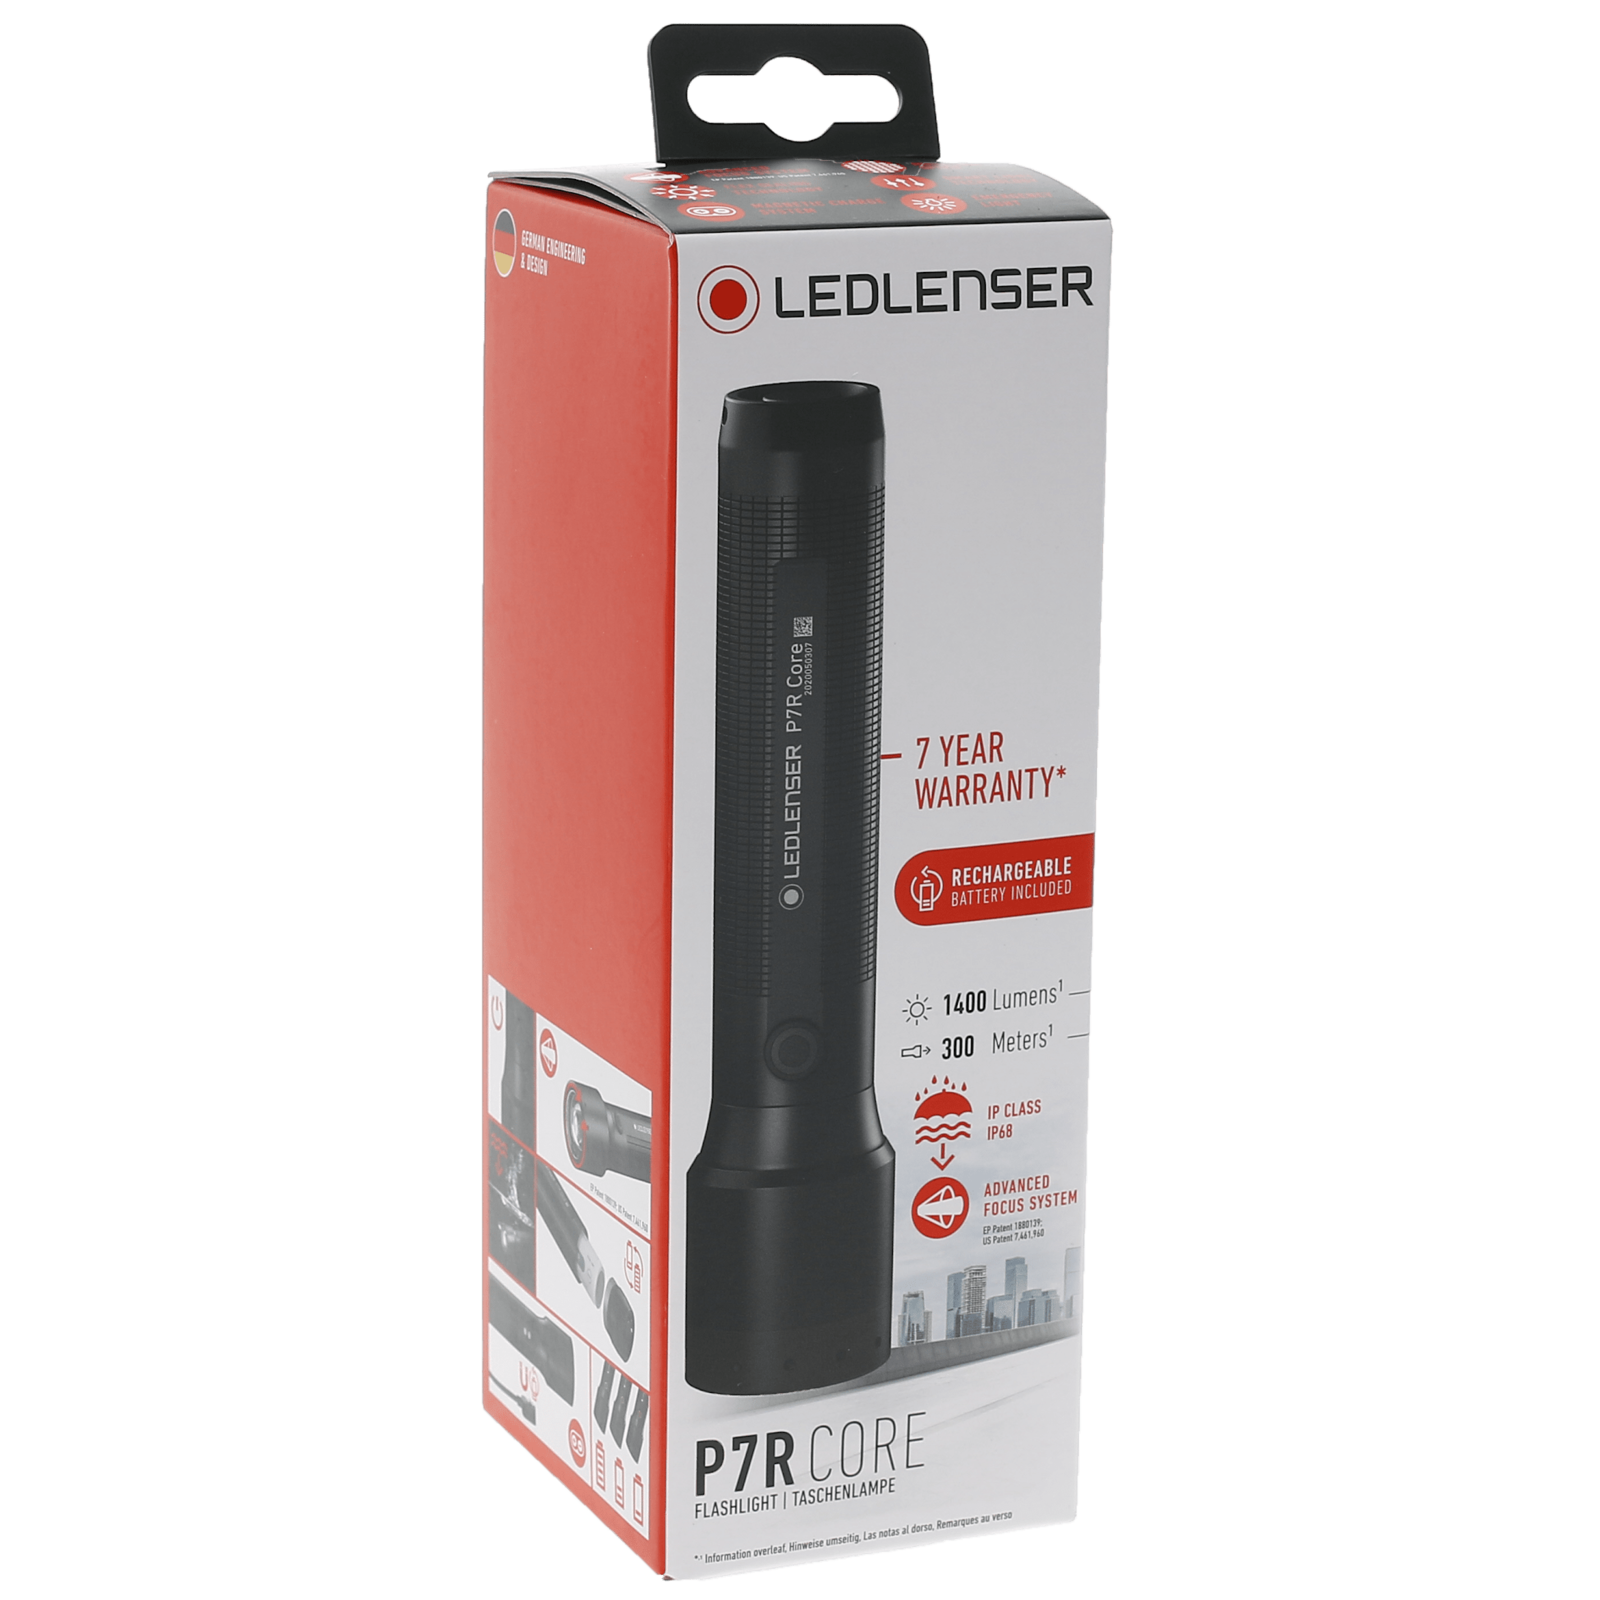 Led Lenser P7R Core Torch Free Shipping